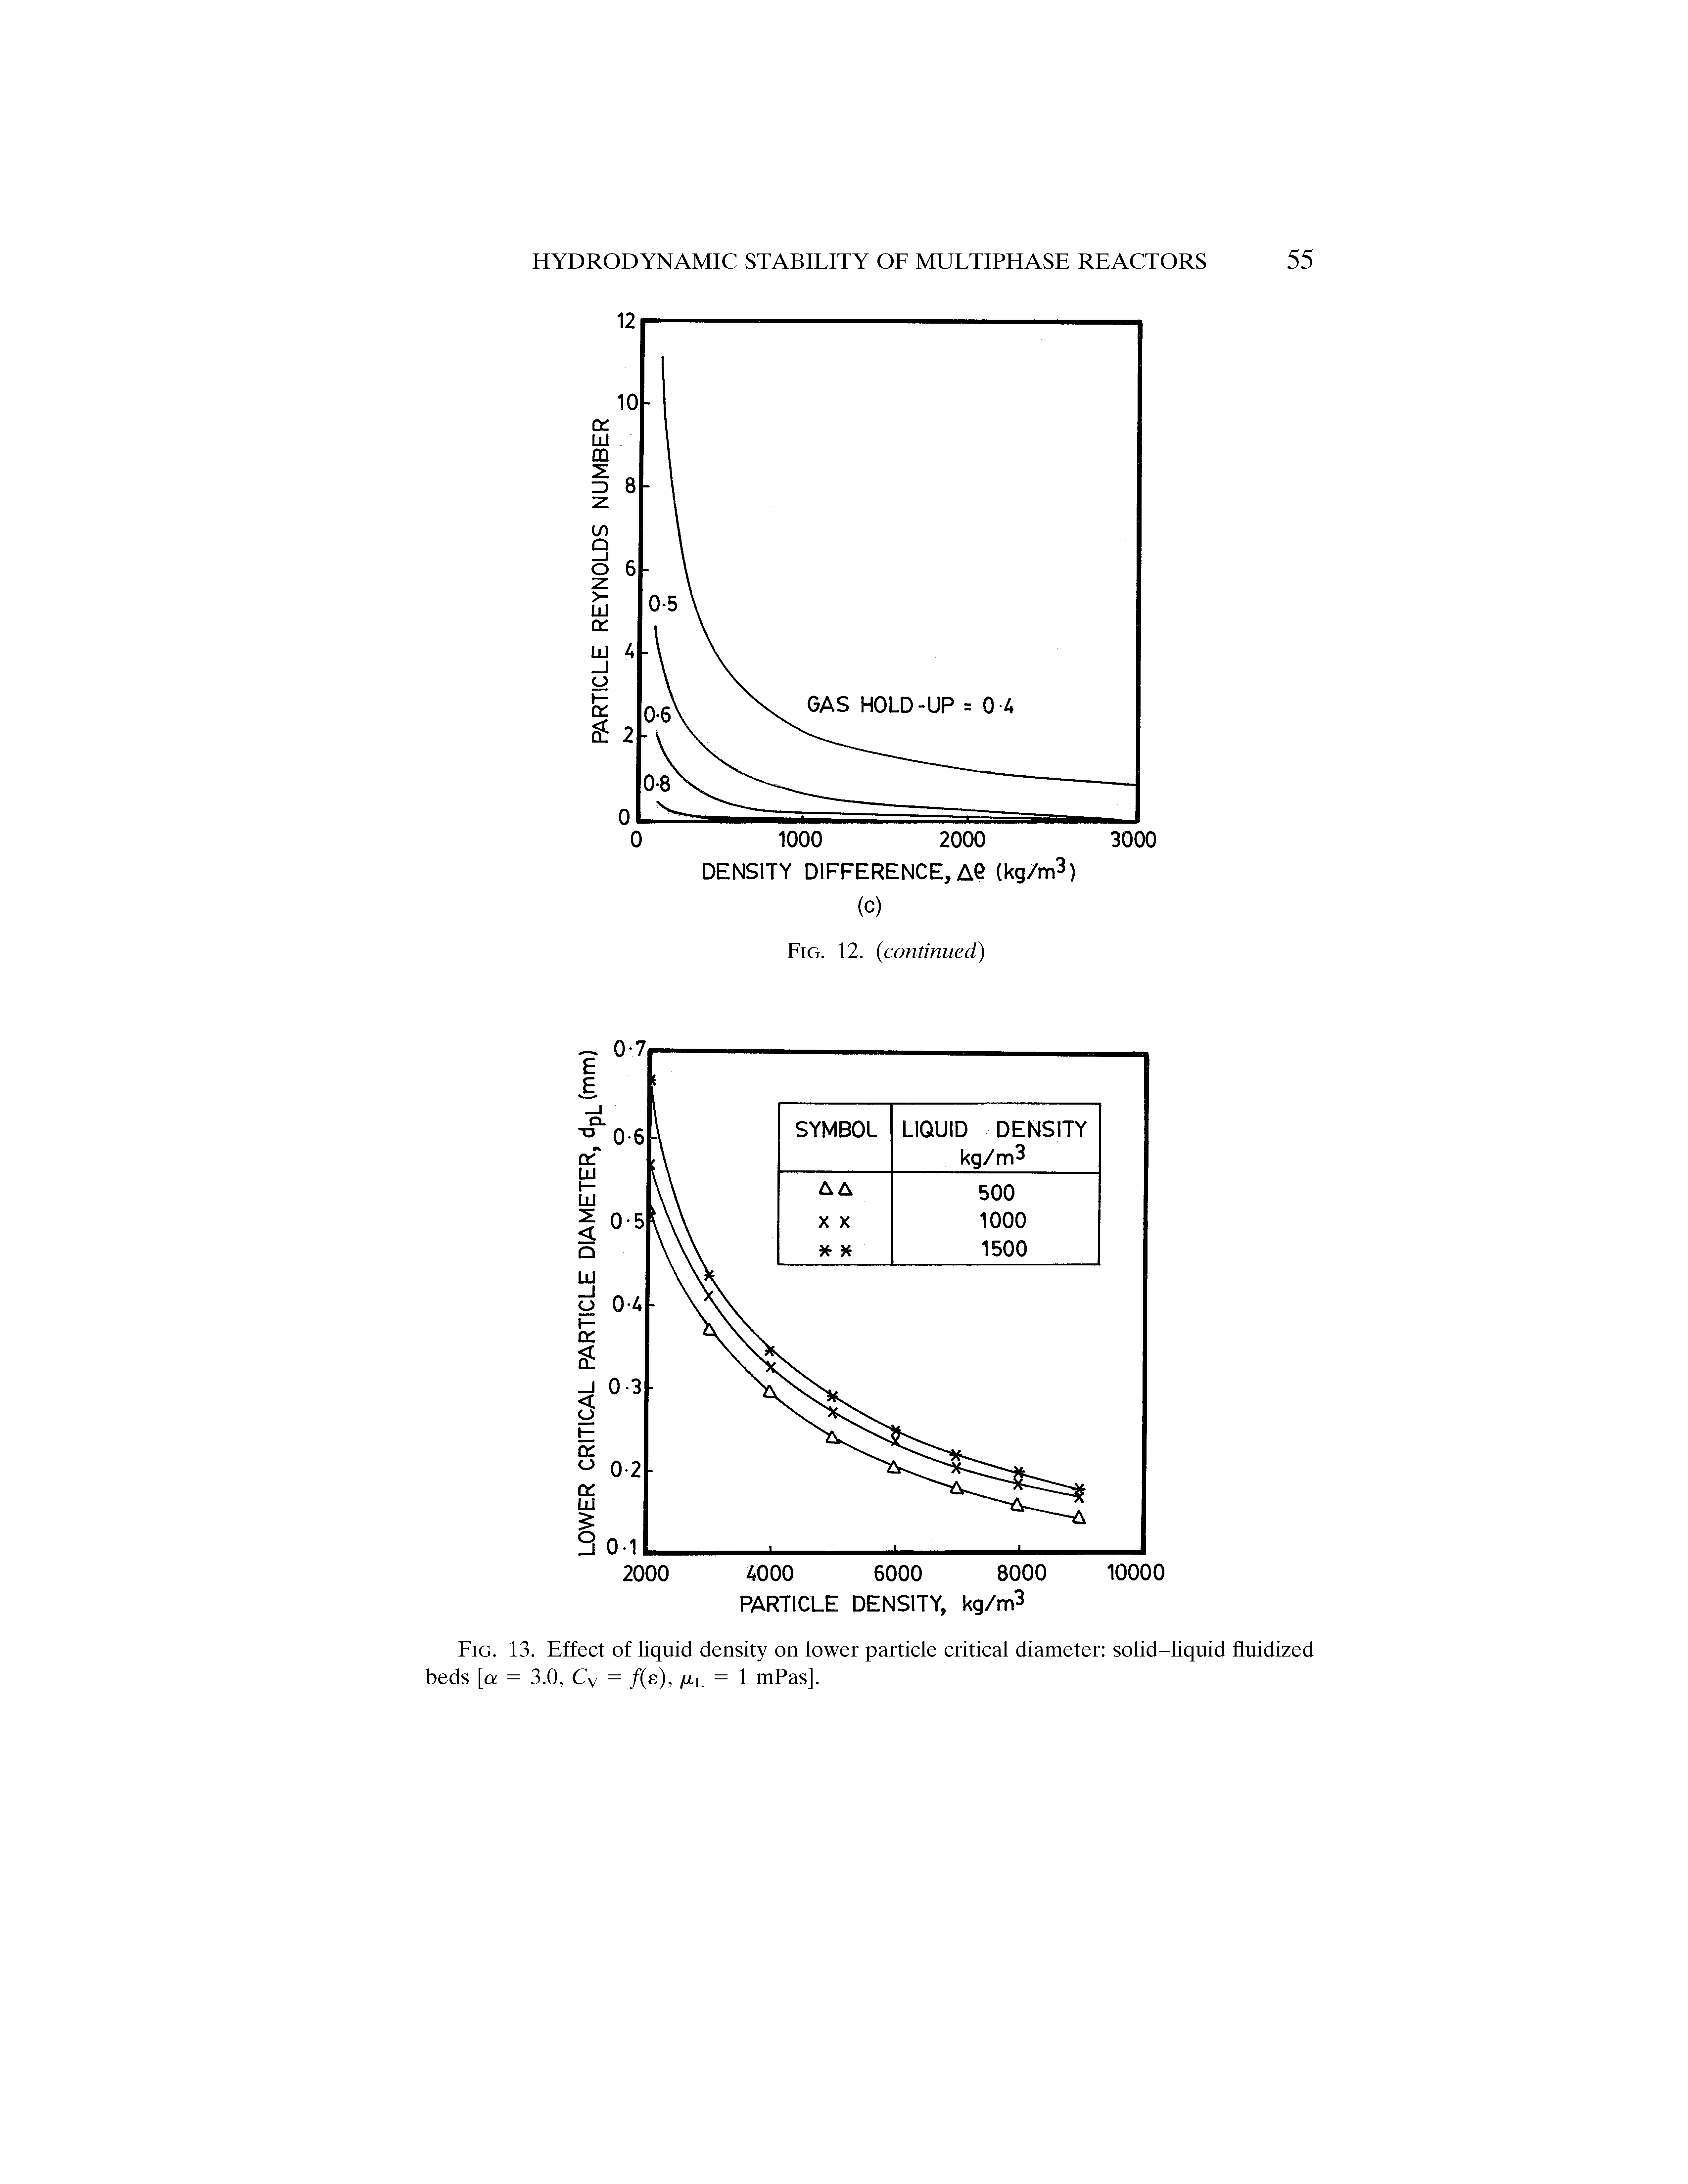 Fig. 13. Effect of liquid density on lower particle critical diameter solid-liquid fluidized beds [a = 3.0, Cy = /(e), Ml = 1 mPas].